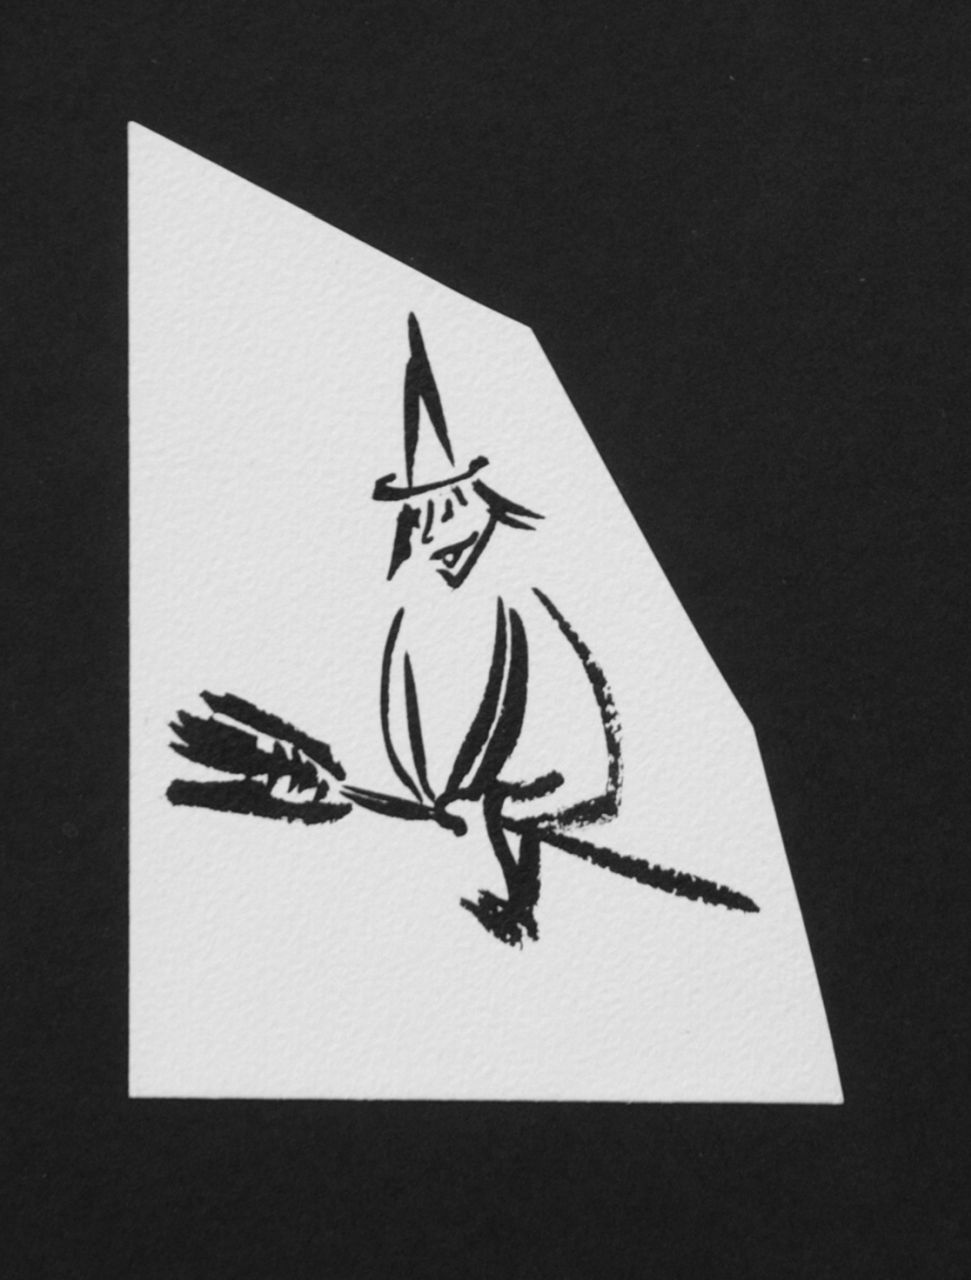 Oranje-Nassau (Prinses Beatrix) B.W.A. van | Beatrix Wilhelmina Armgard van Oranje-Nassau (Prinses Beatrix), Witch on a broomstick, pencil and black ink on paper 11.0 x 8.0 cm, executed August 1960